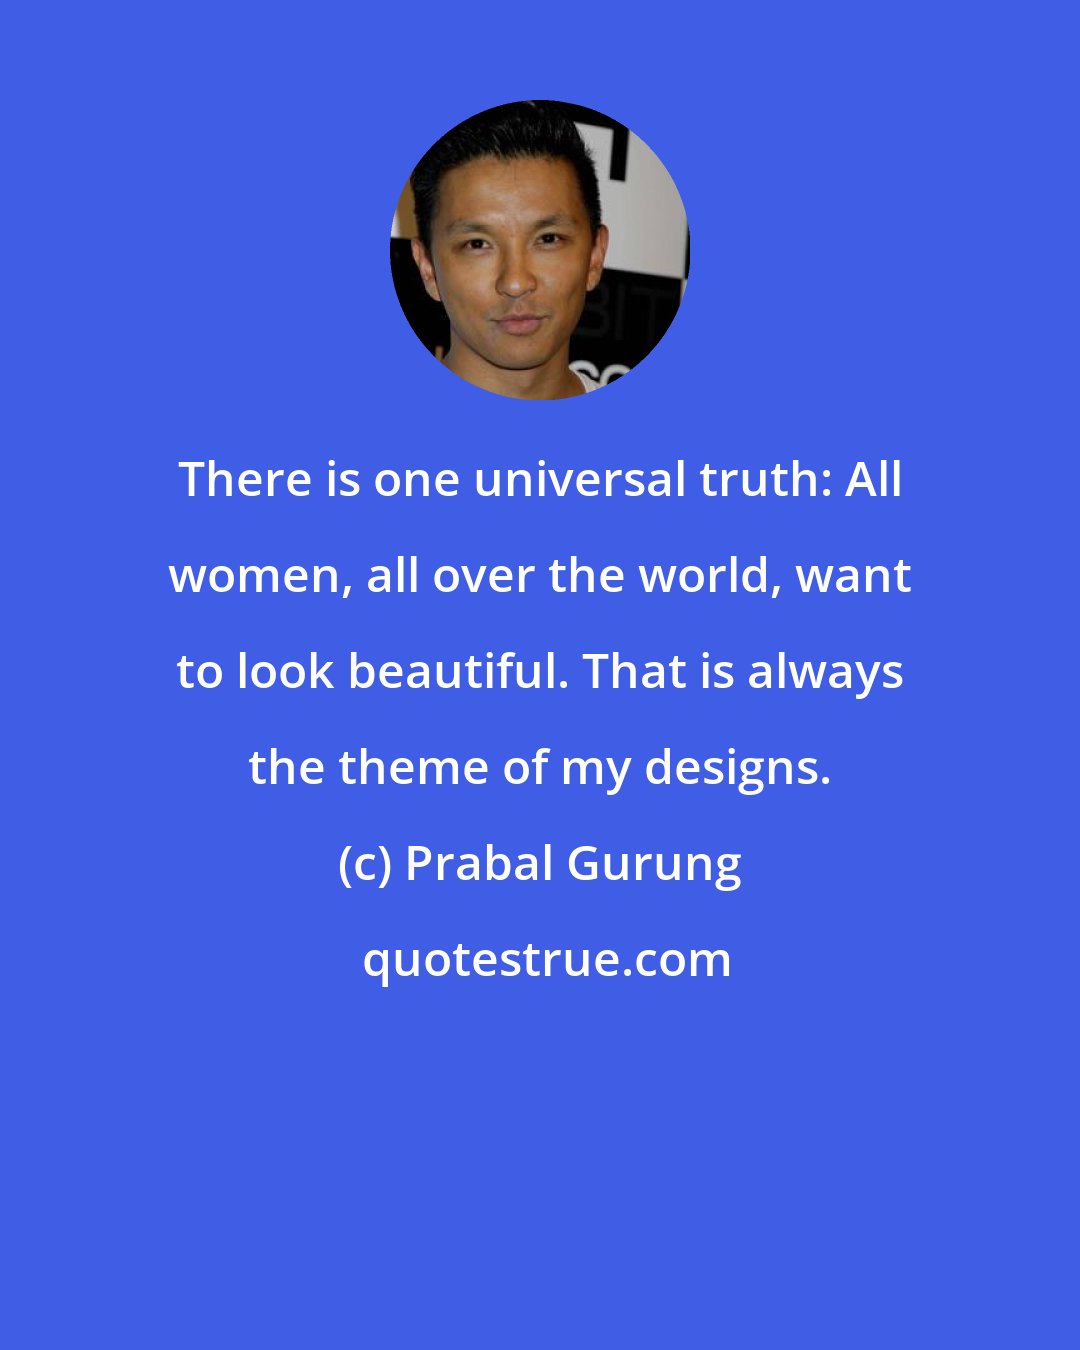 Prabal Gurung: There is one universal truth: All women, all over the world, want to look beautiful. That is always the theme of my designs.